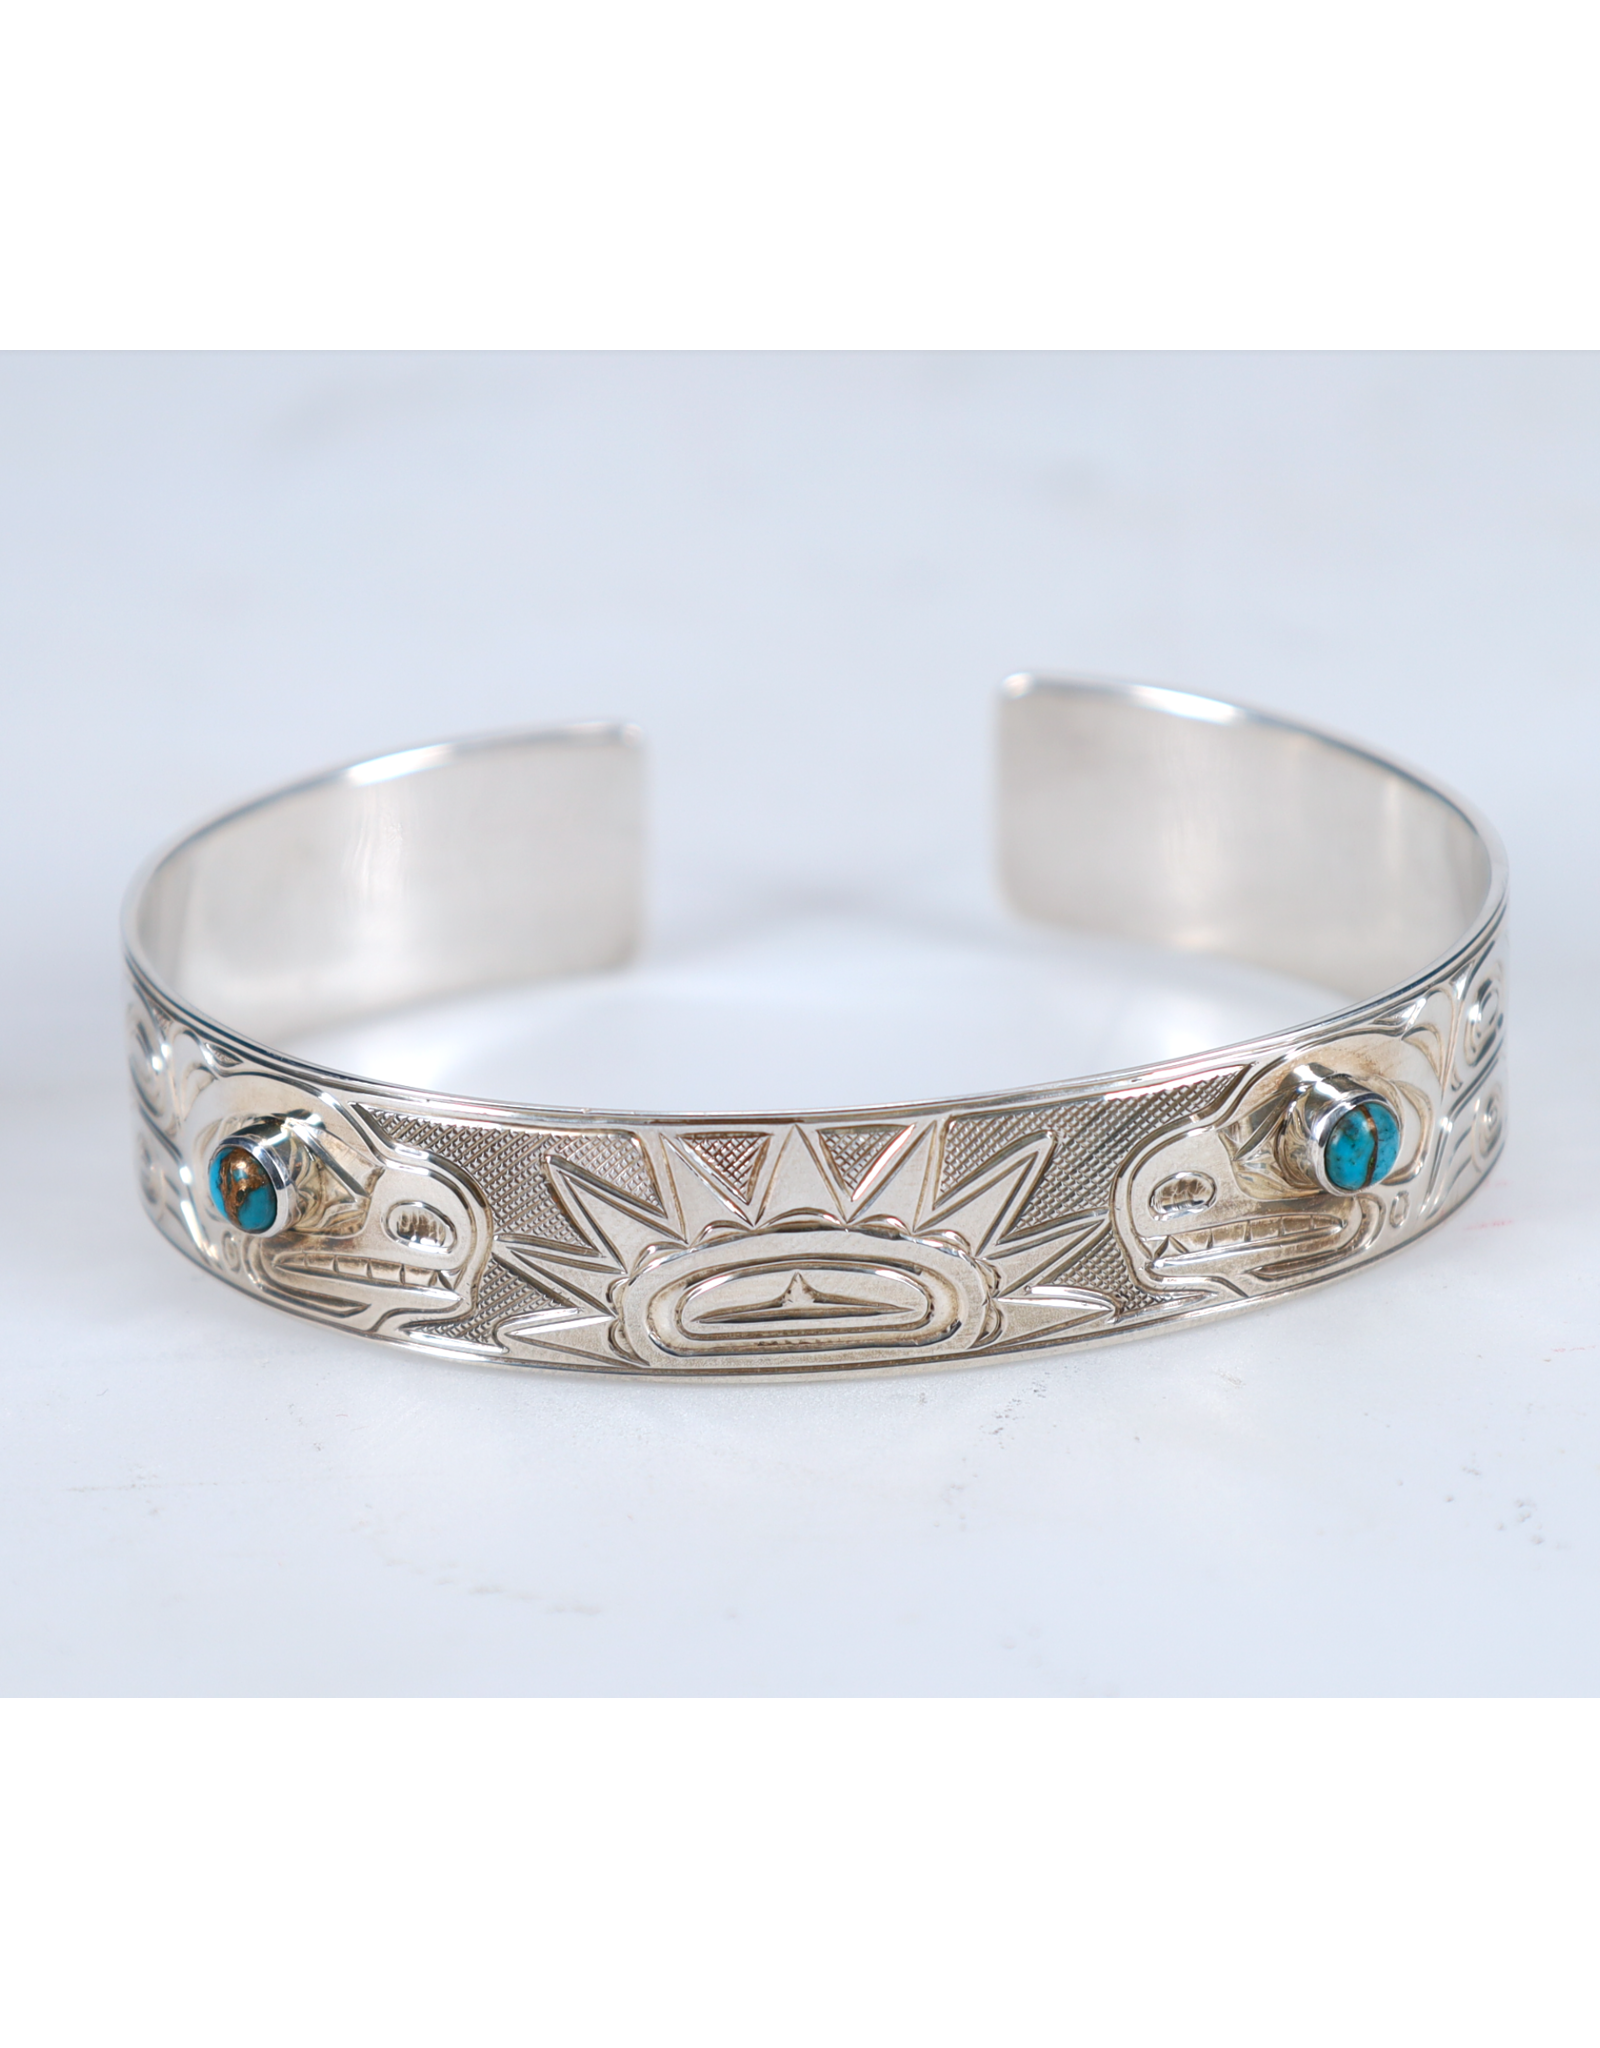 Chris Cook Silver Cuff - Otters and Urchin with Turquoise - CCSC07